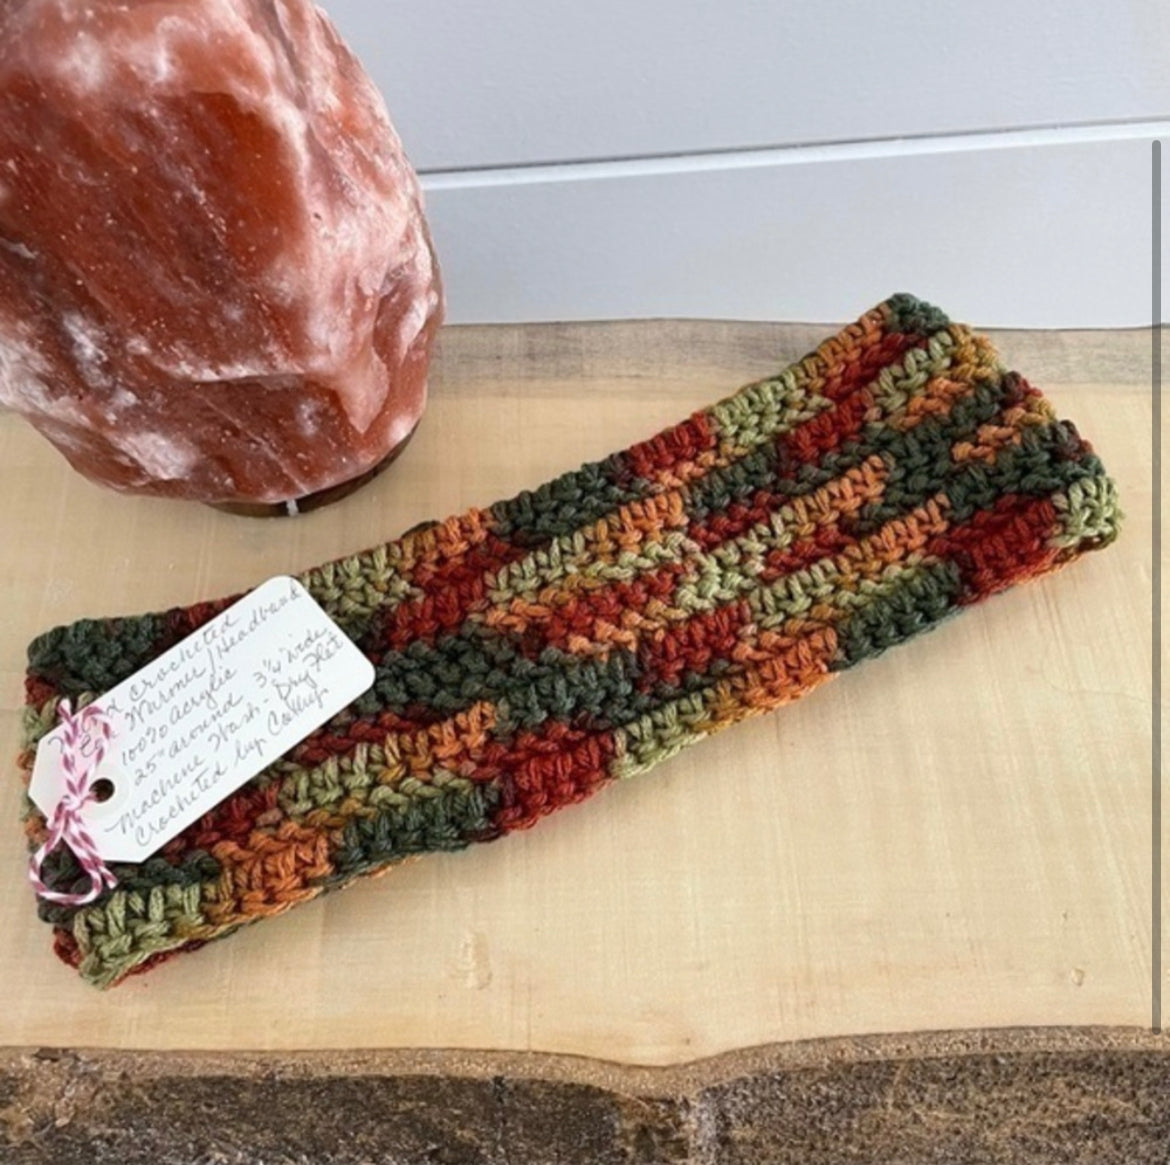 Autumn Whimsy & Wood Button Ear Warmer 25" Headband Crochet Knit Hand Crafted Outdoor Fall Winter Hiking Running Red Orange Green